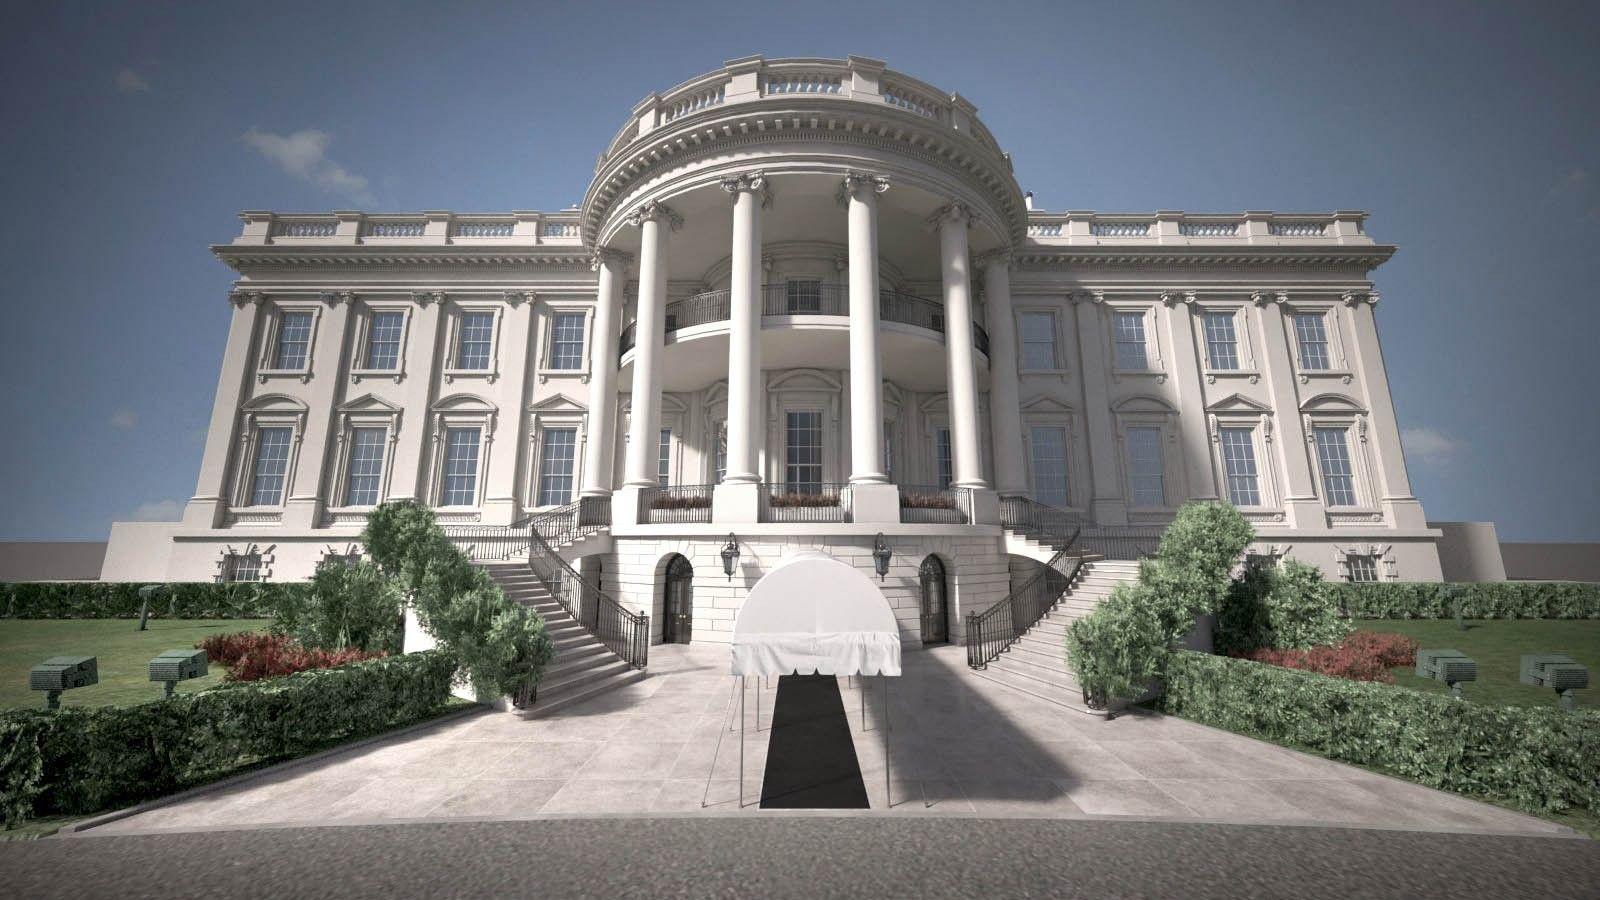 7214199 White House Images Stock Photos  Vectors  Shutterstock